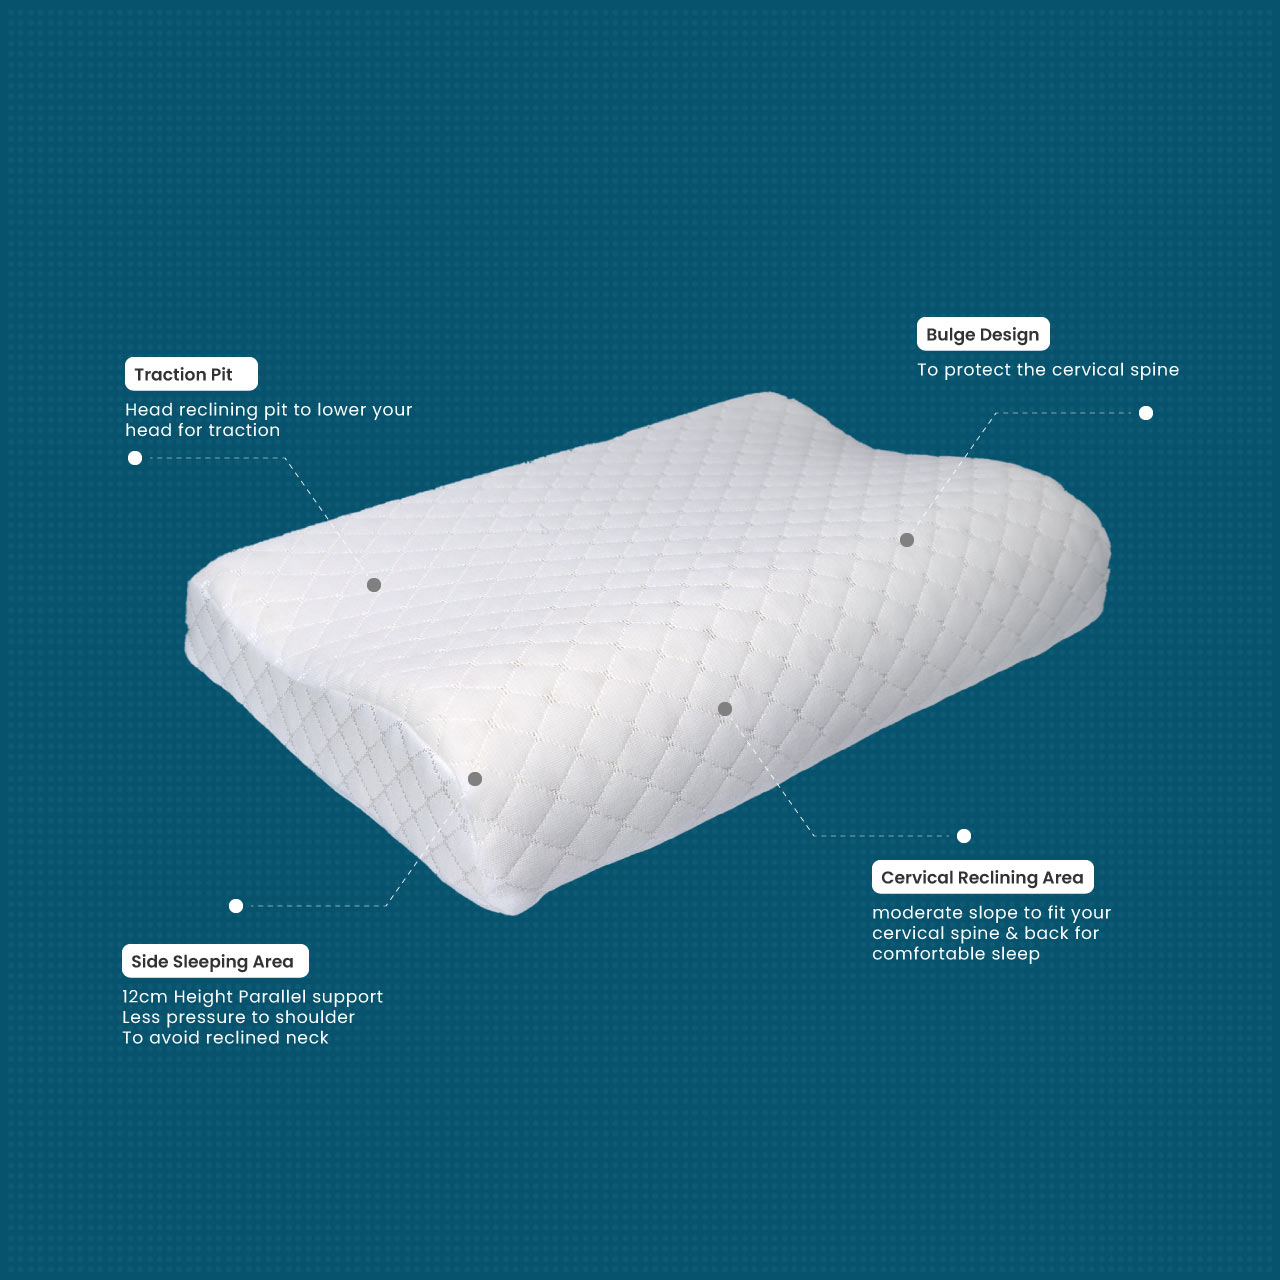 High Quality King Size 40x70 (11x13) Knitted Anti Snore Contour Cervical Neck Support Memory Foam Pillow with Washable Grey Cover